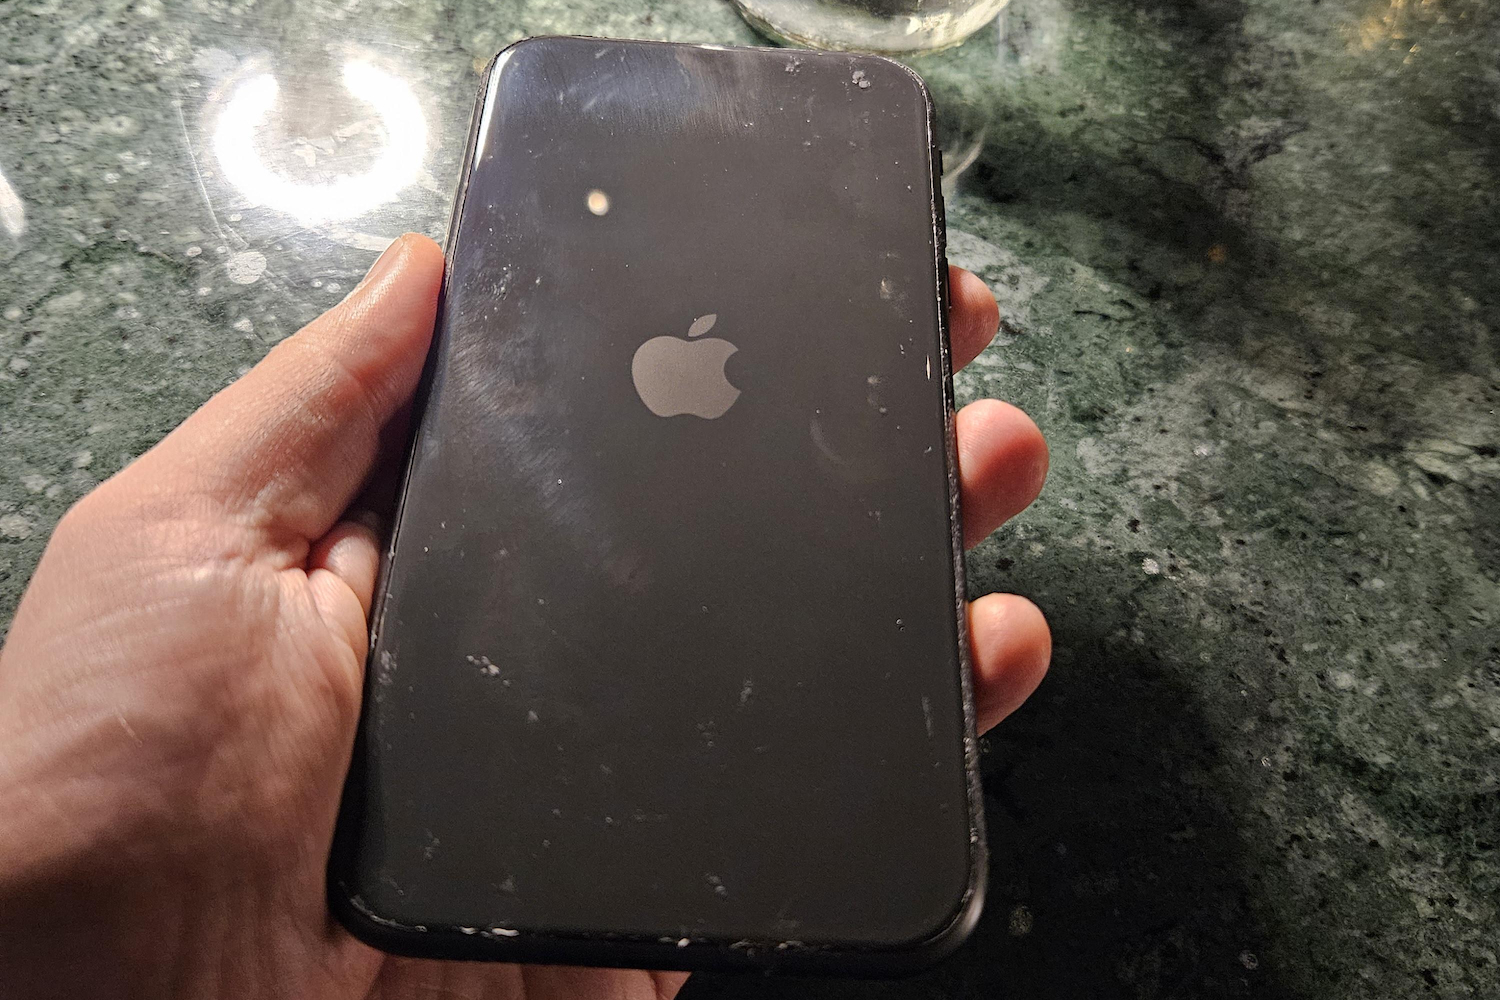 An image of an iPhone without a camera.